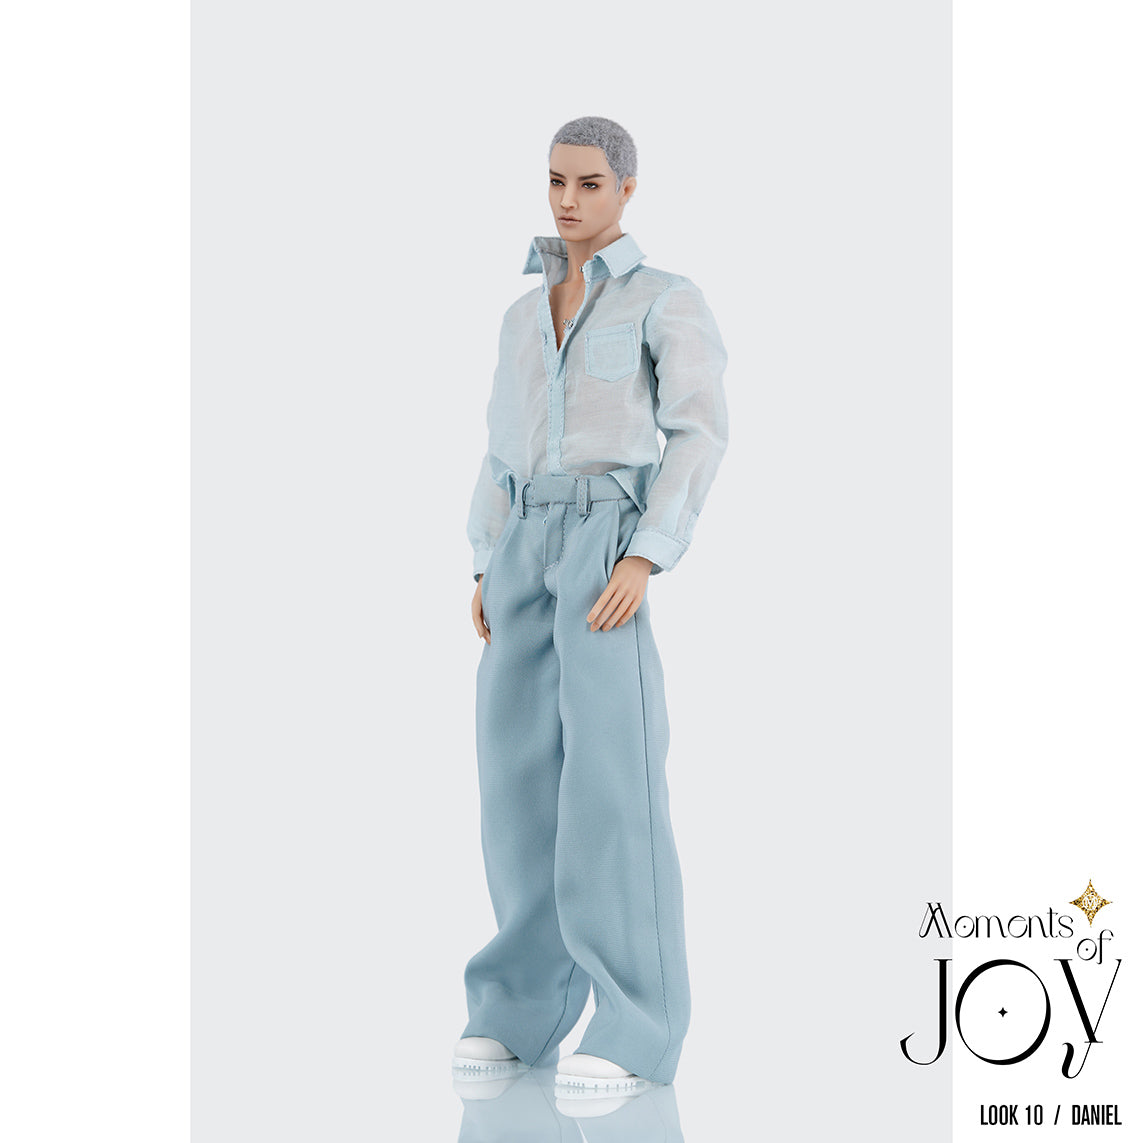 Muses Moments of Joy Men's Fashion Look 10